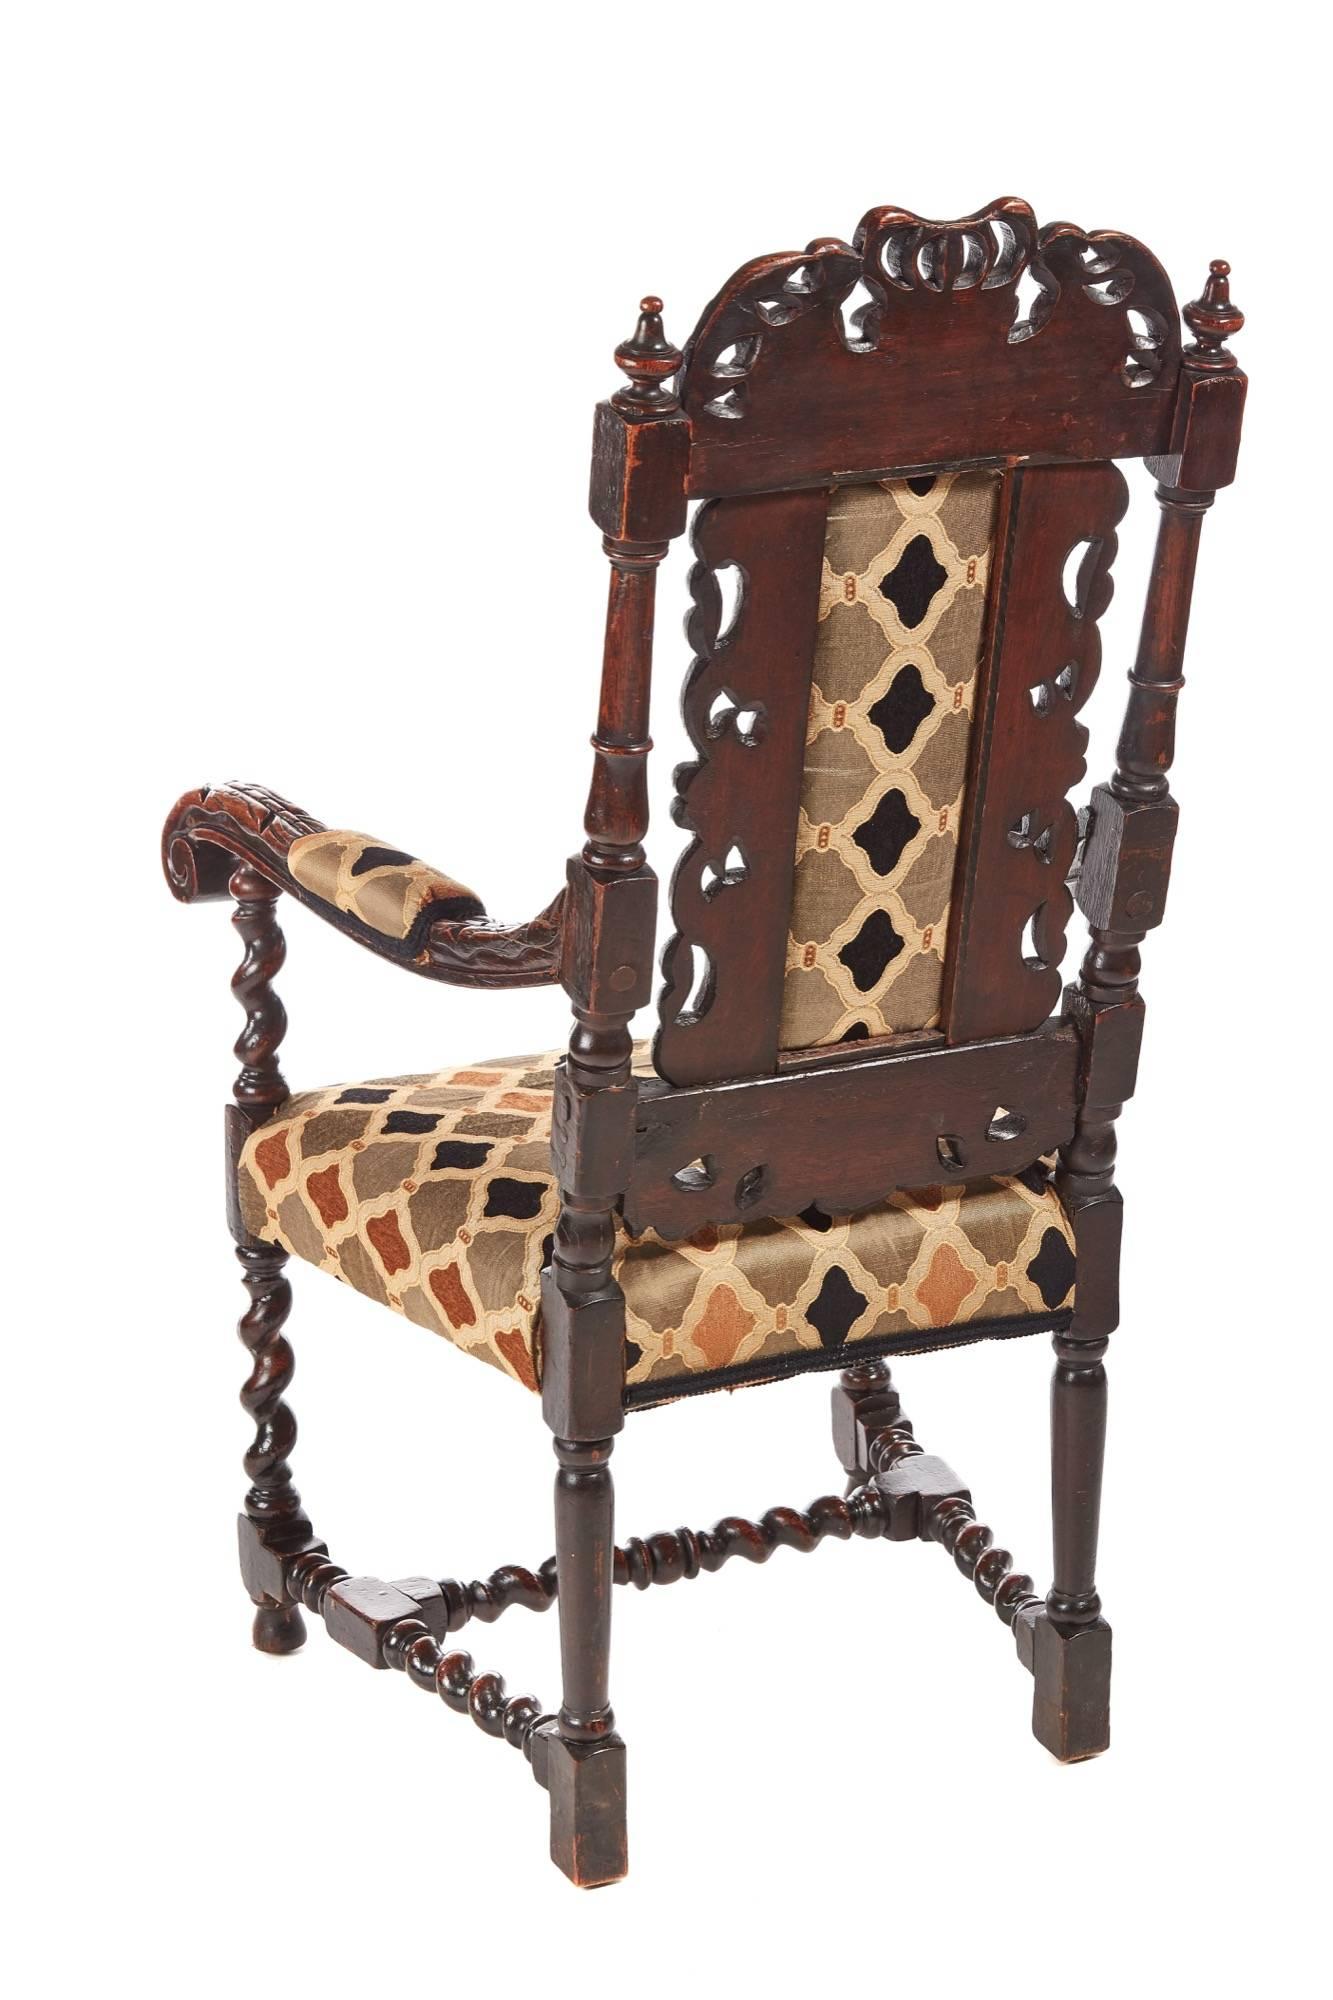 Fantastic antique carved oak throne chair, lovely carved detail to the top, carved back, lovely shaped carved arms, standing on barley twist legs to the front, turned back legs, united by barley twist stretchers
Newly re-upholstered
Fantastic